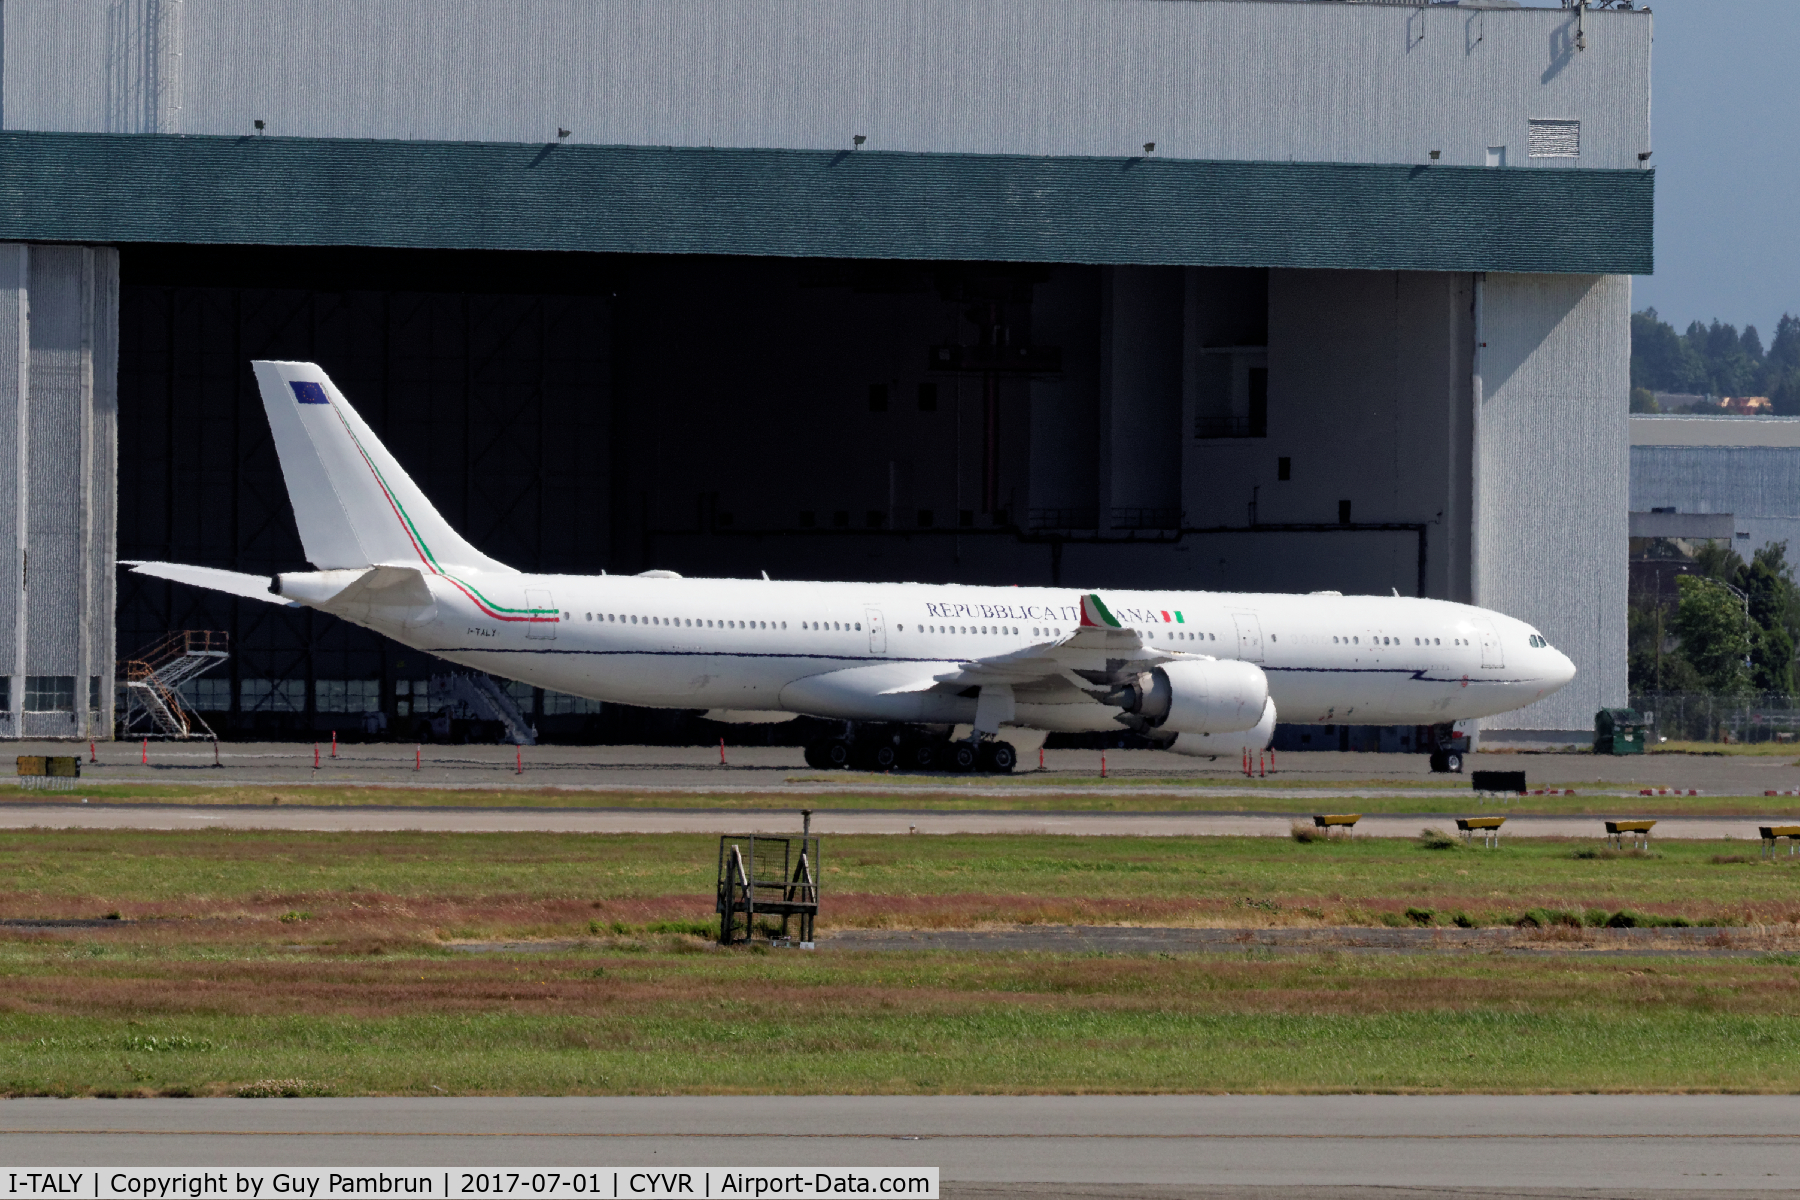 I-TALY, 2006 Airbus A340-541 C/N 748, Parked